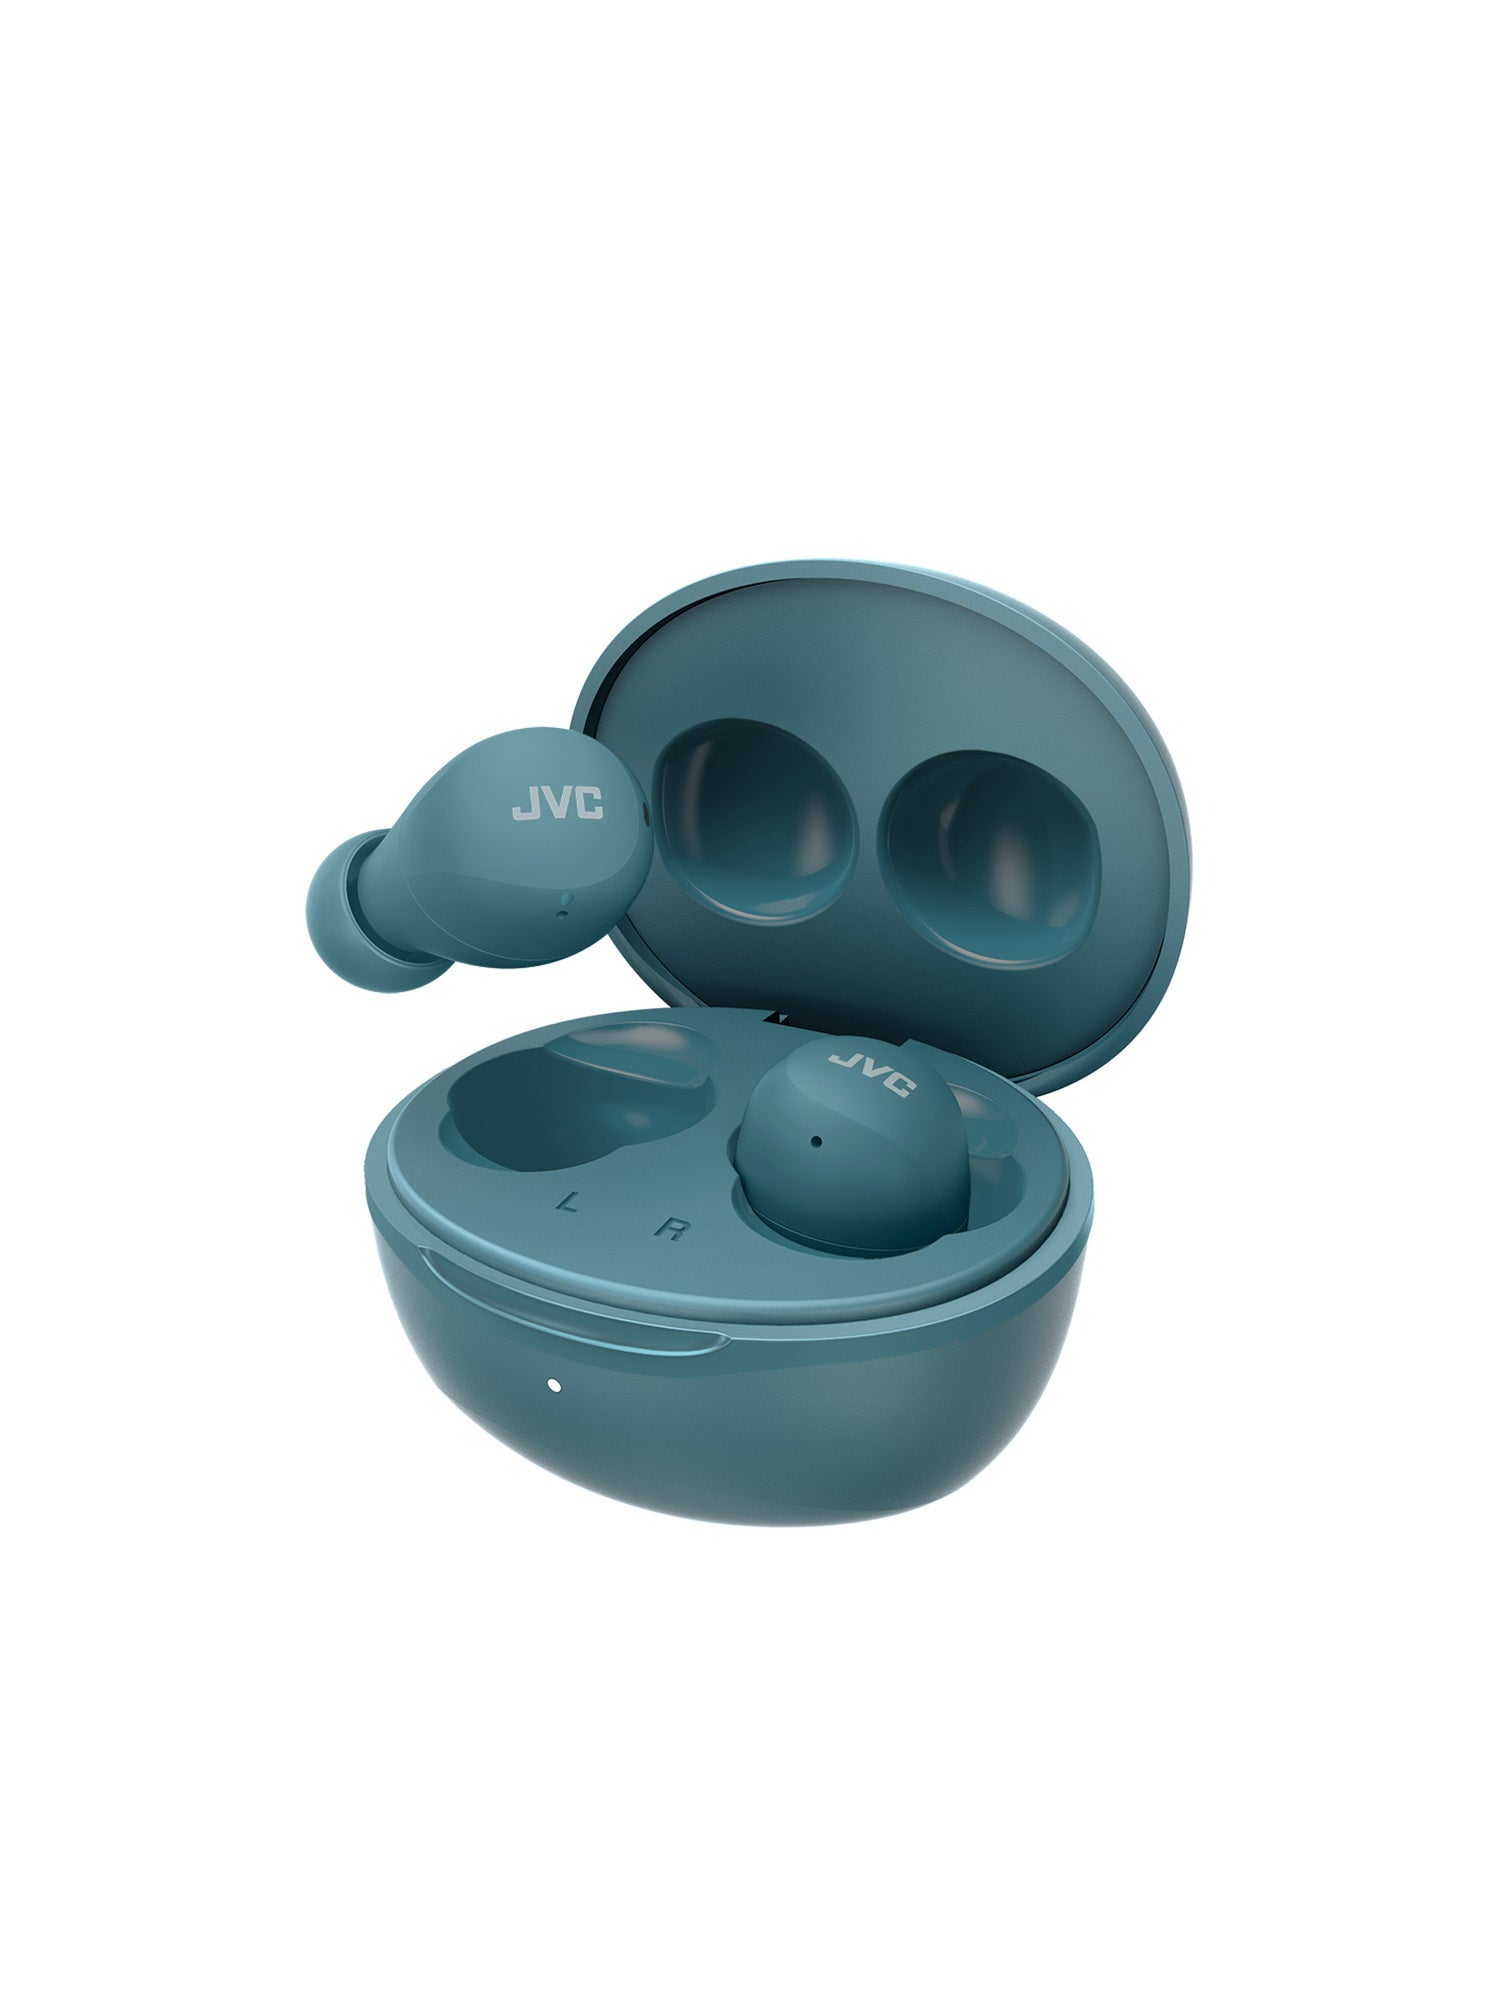 HA-A6T-G in green Gumy mini wireless earbuds and charging case by JVC